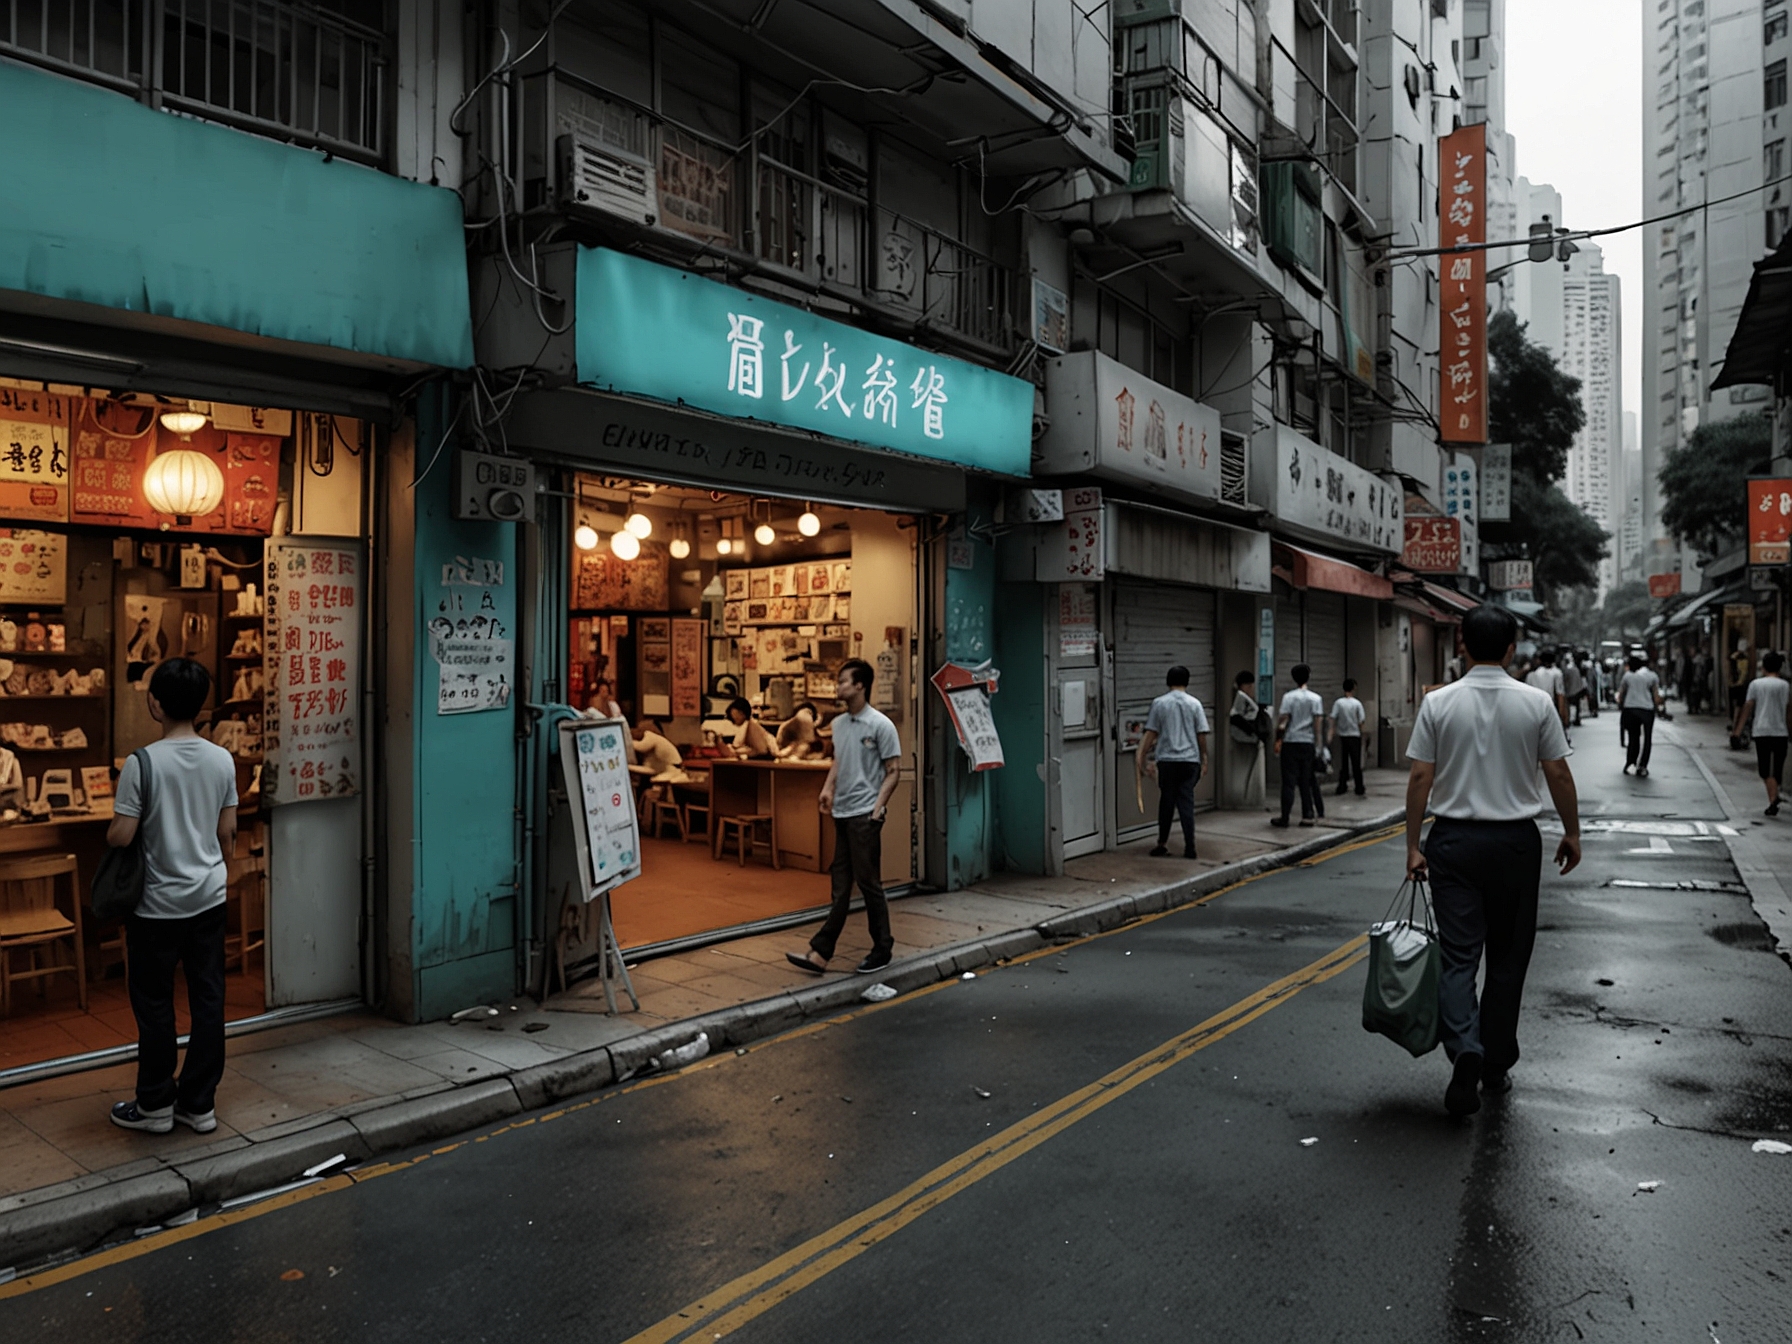 A busy Hong Kong street with closed or sparsely occupied shops, representing the slowdown in the services sector amidst the overall tech-driven market optimism.